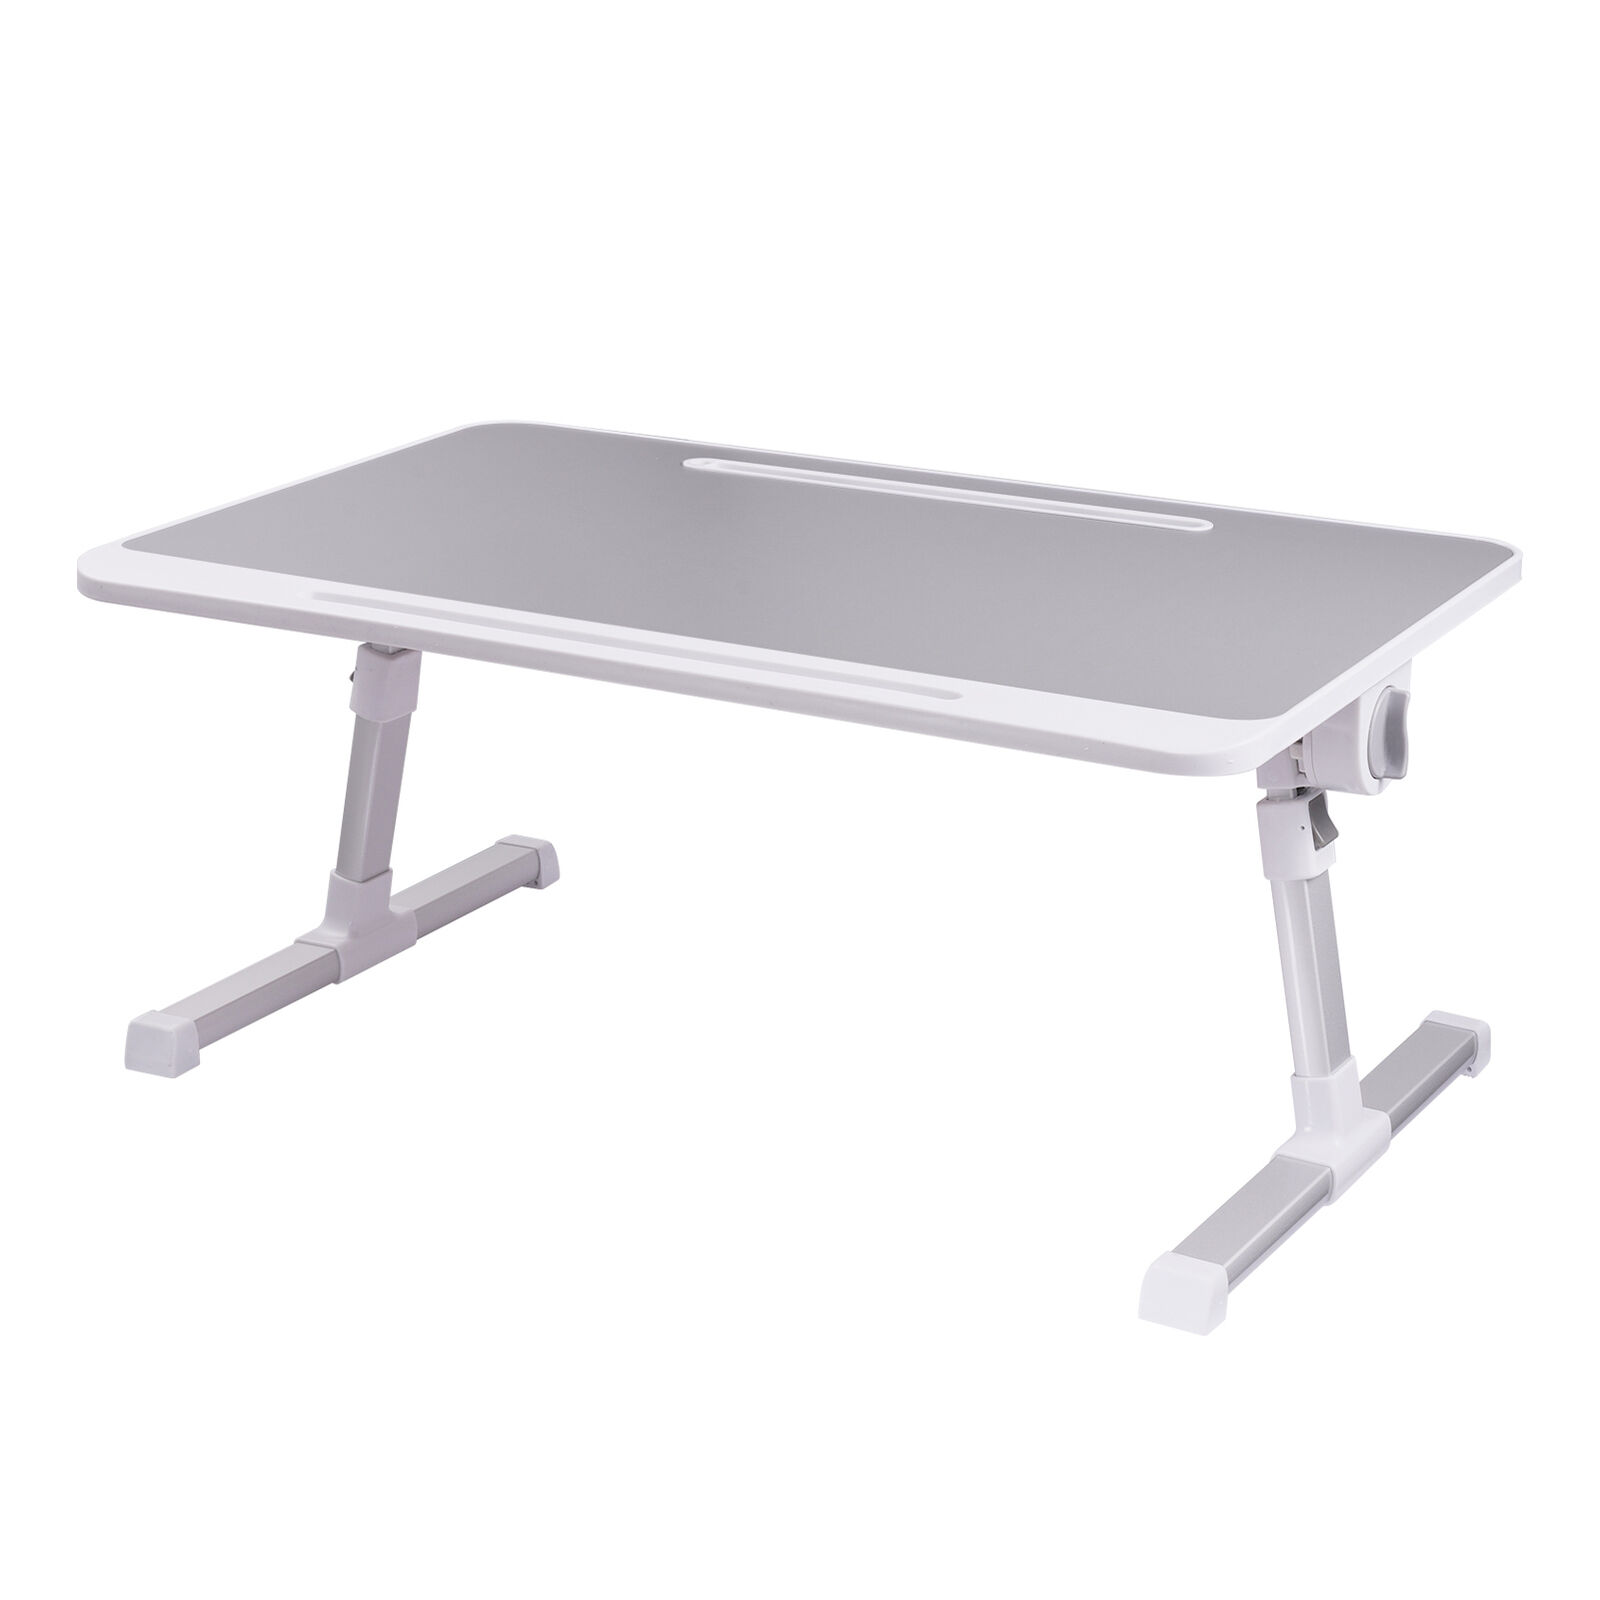 Portable Adjustable Folding Laptop Desk Foldable Study Computer Bed Table Stand